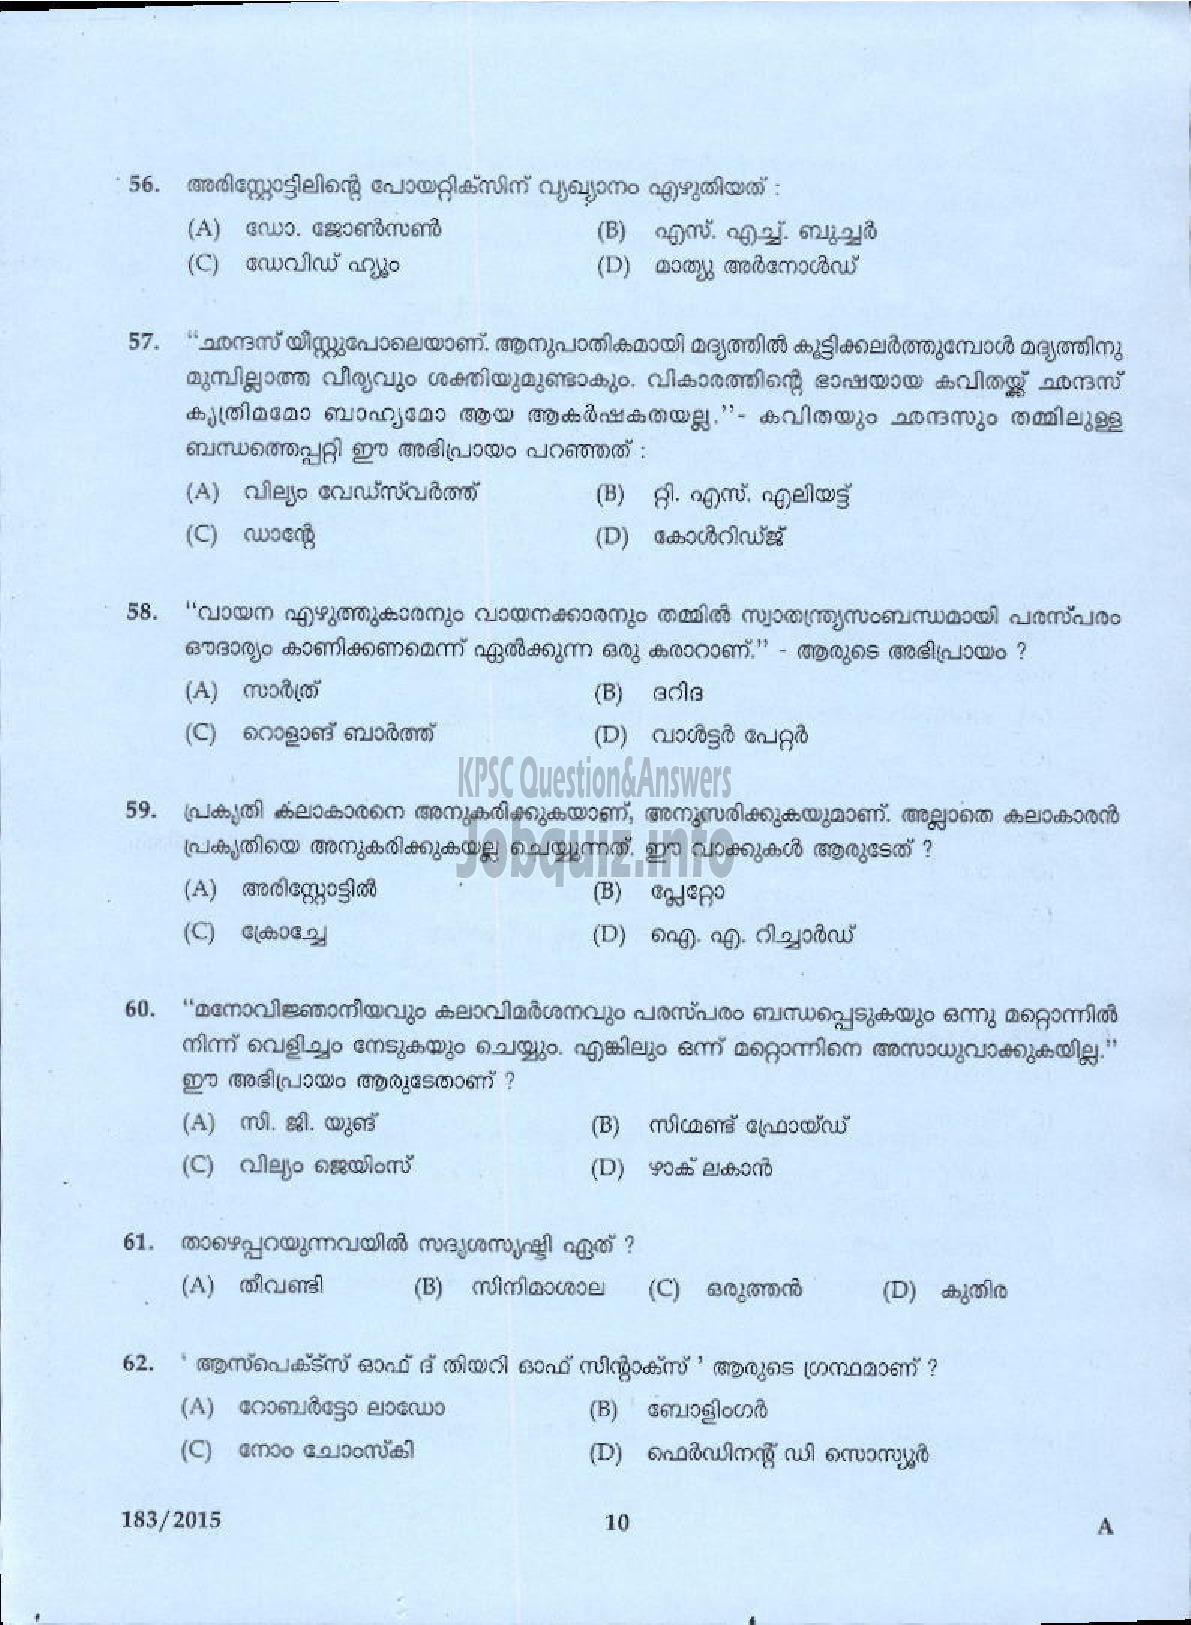 Kerala PSC Question Paper - LECTURER IN MALAYALAM COLLEGIATE EDUCATION-8